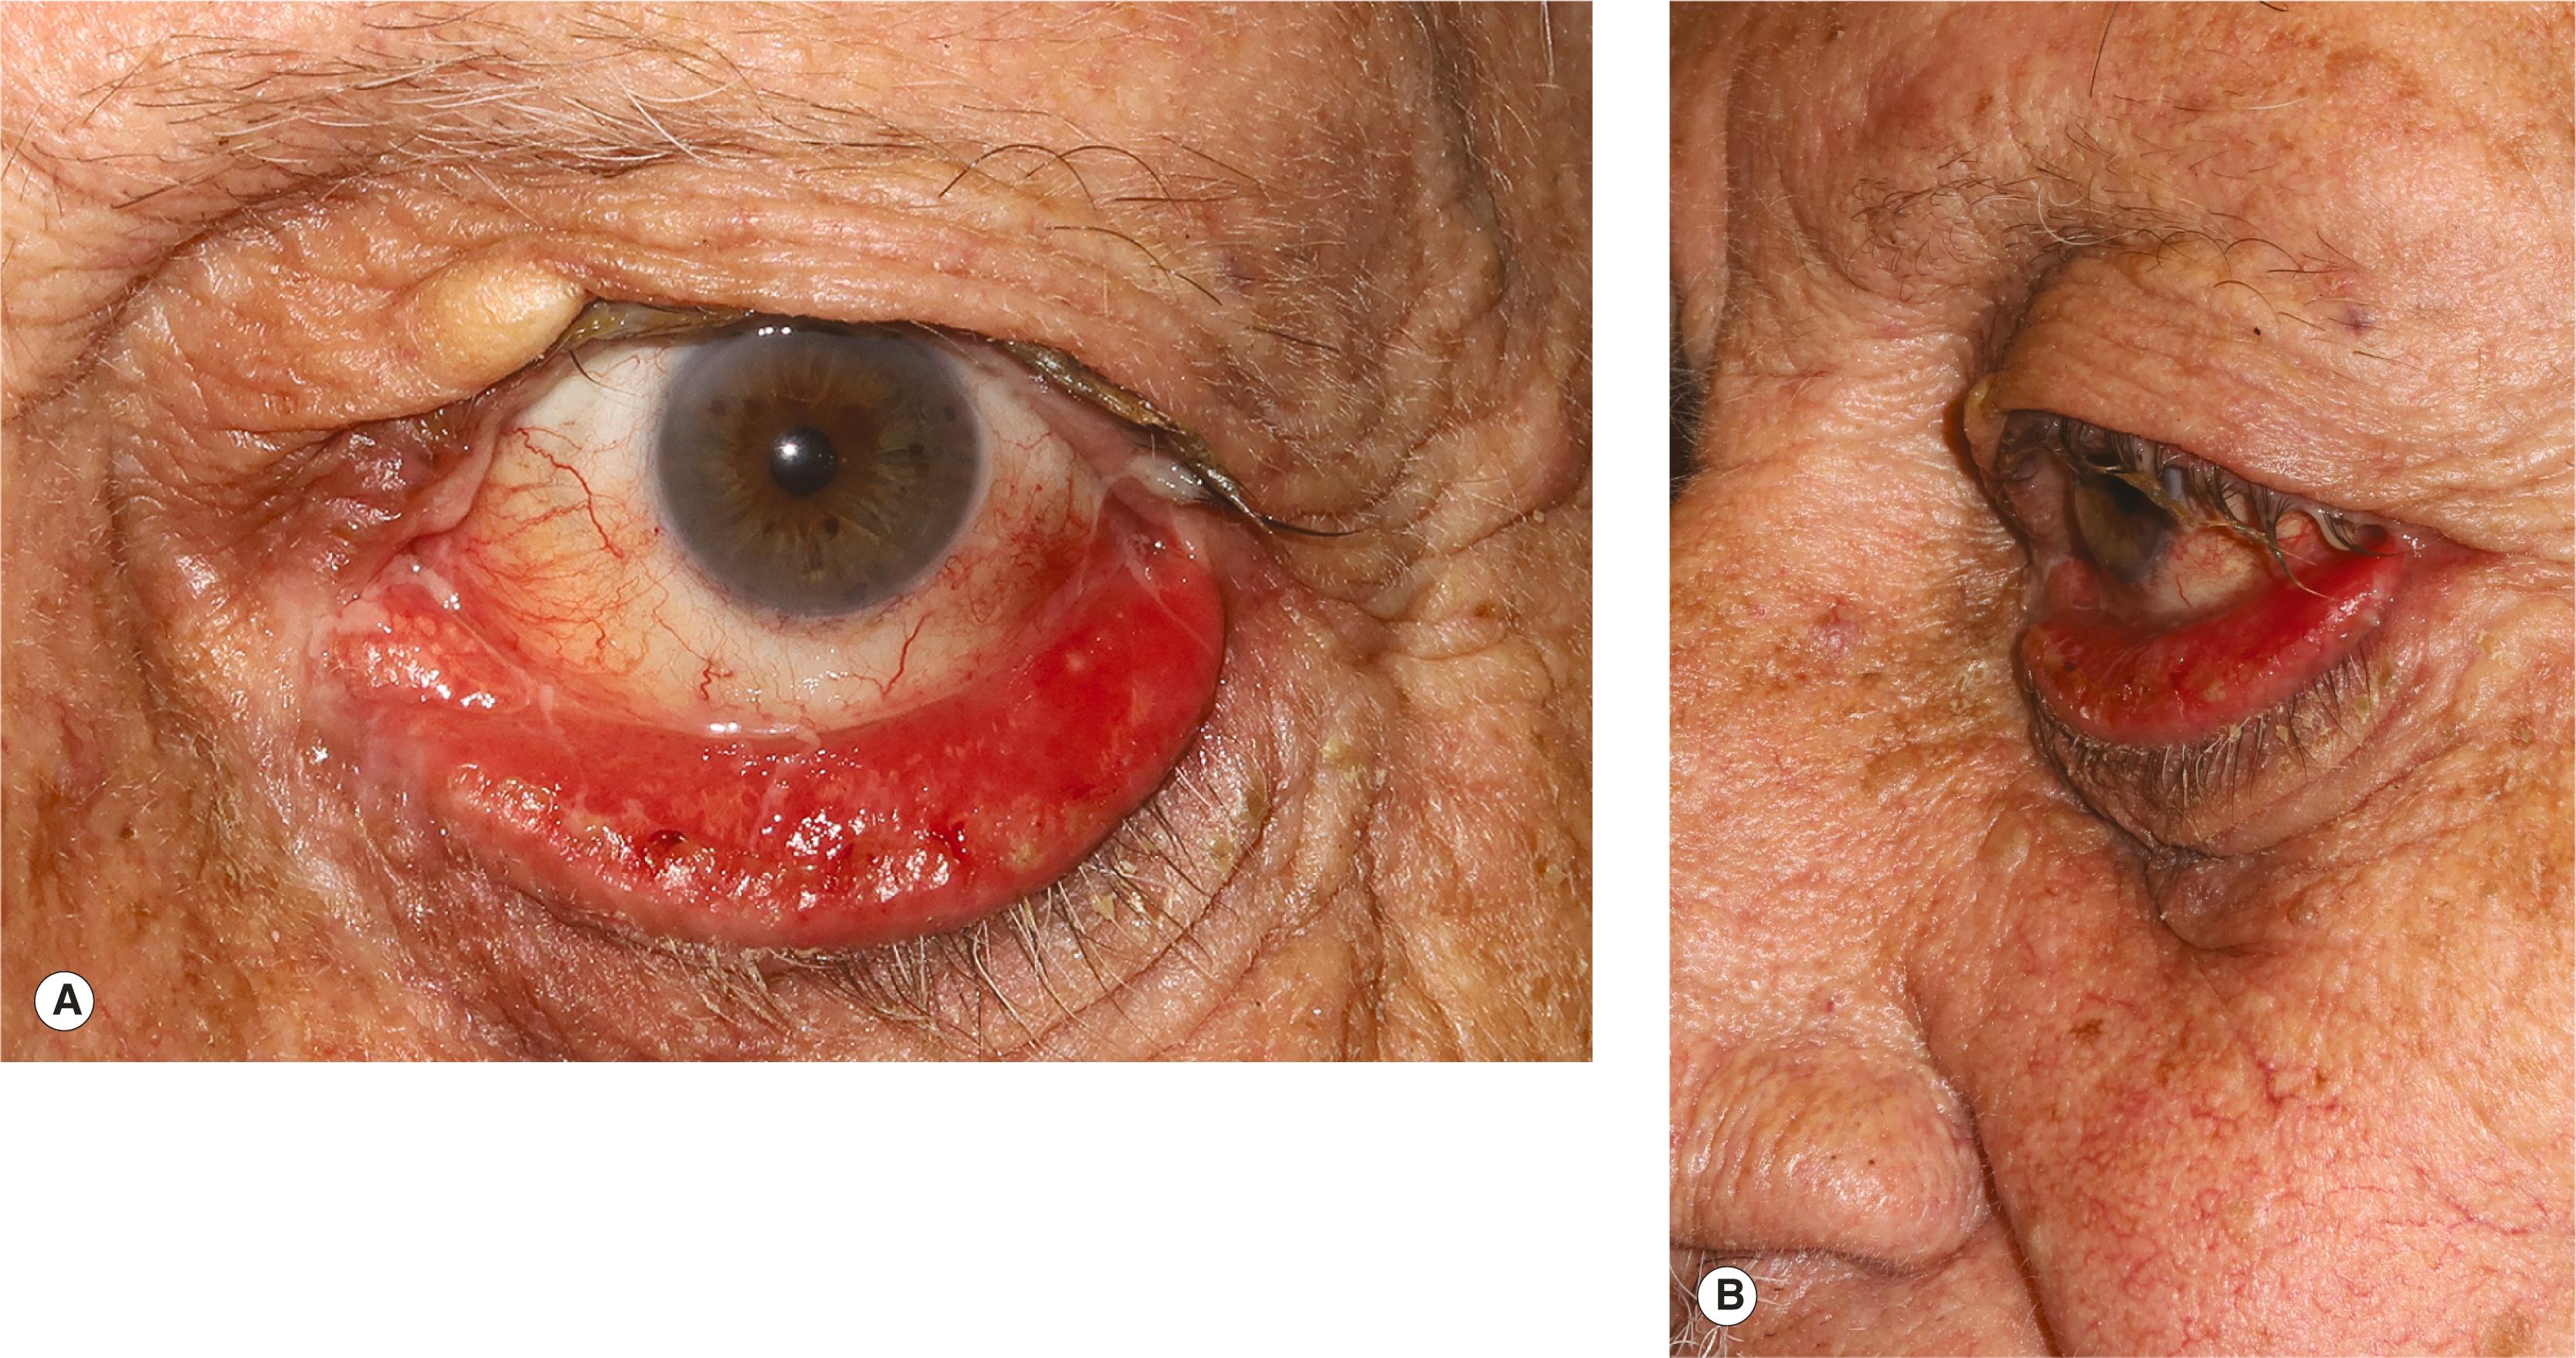 Figure 3.5, Tarsal ectropion often results from a combination of involutional and cicatricial changes. ( A ) The lower eyelid is completely everted, leading to an irritated eye with chronic drainage. ( B ) The horizontal eyelid laxity is complicated by the negative vector lower eyelid configuration.